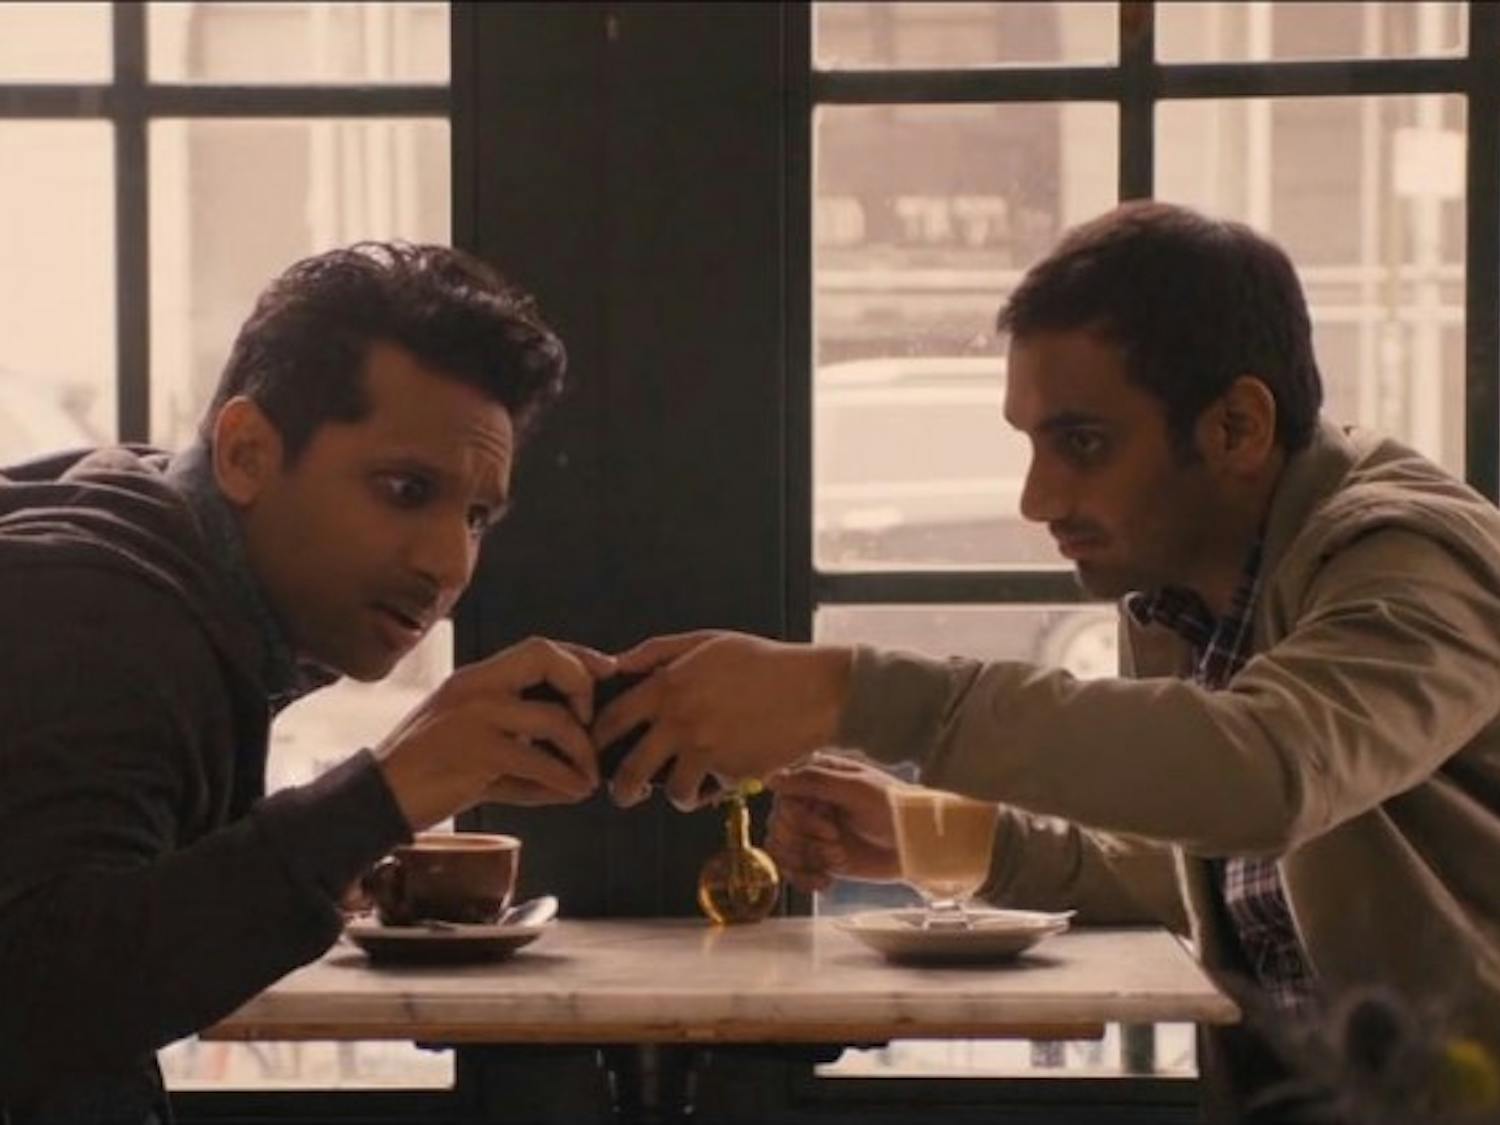 As Dev (right), Aziz Ansari brings out the subtle humor of everyday life in Season 2 of Netflix's&nbsp;"Master of None."